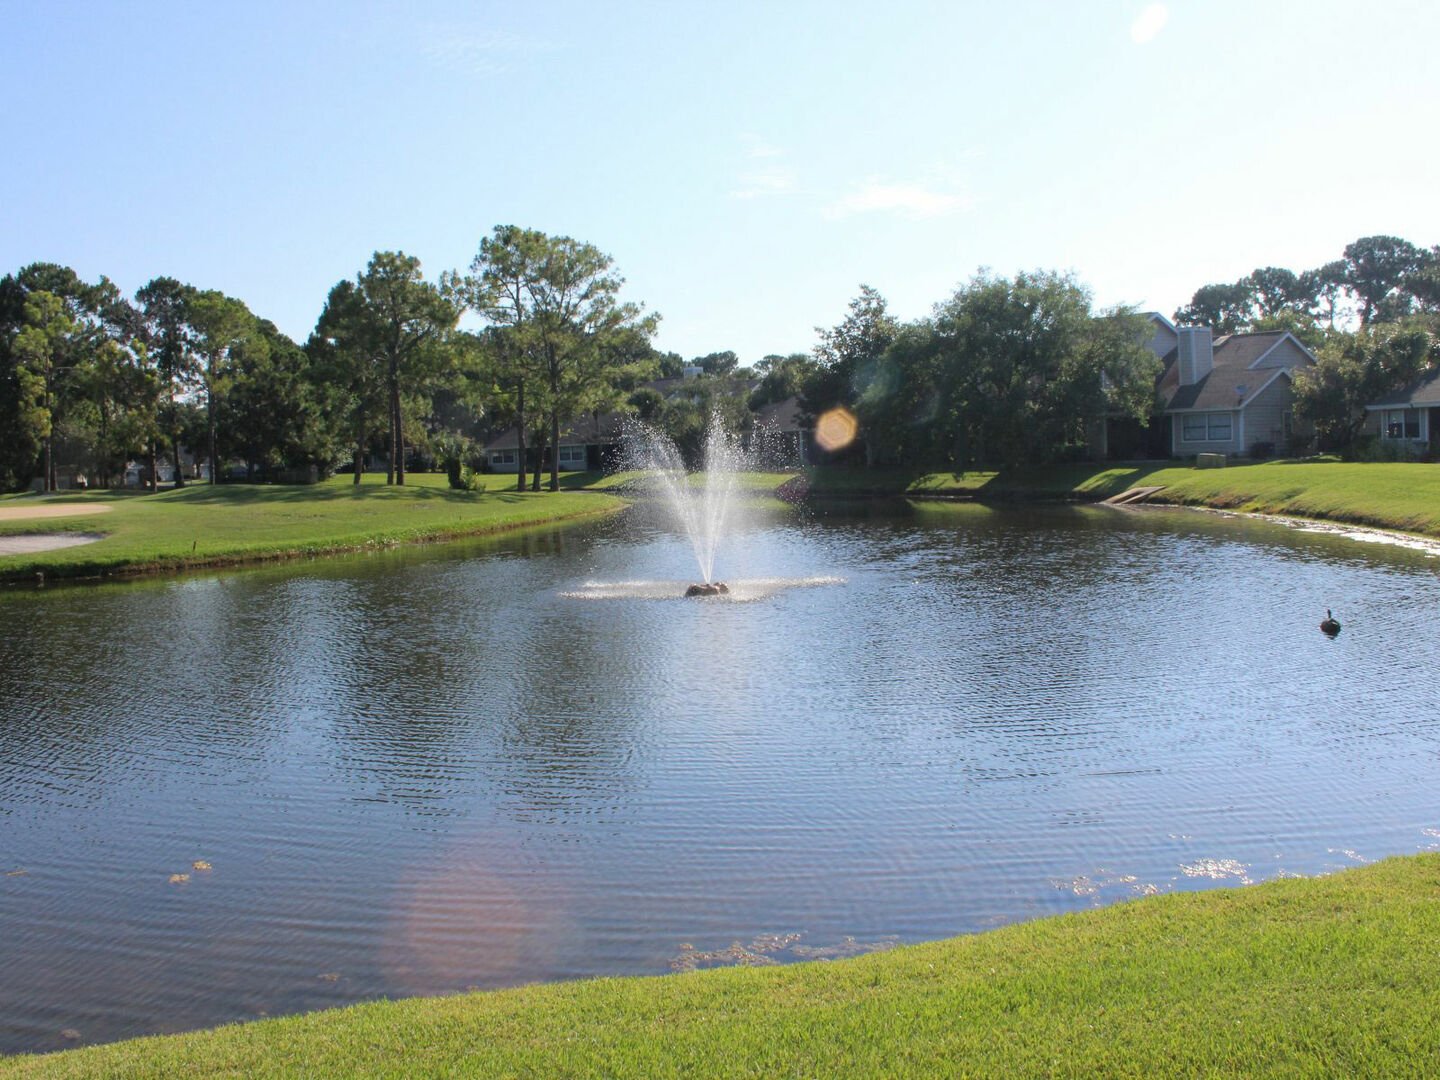 Views of the fountain and golf course.